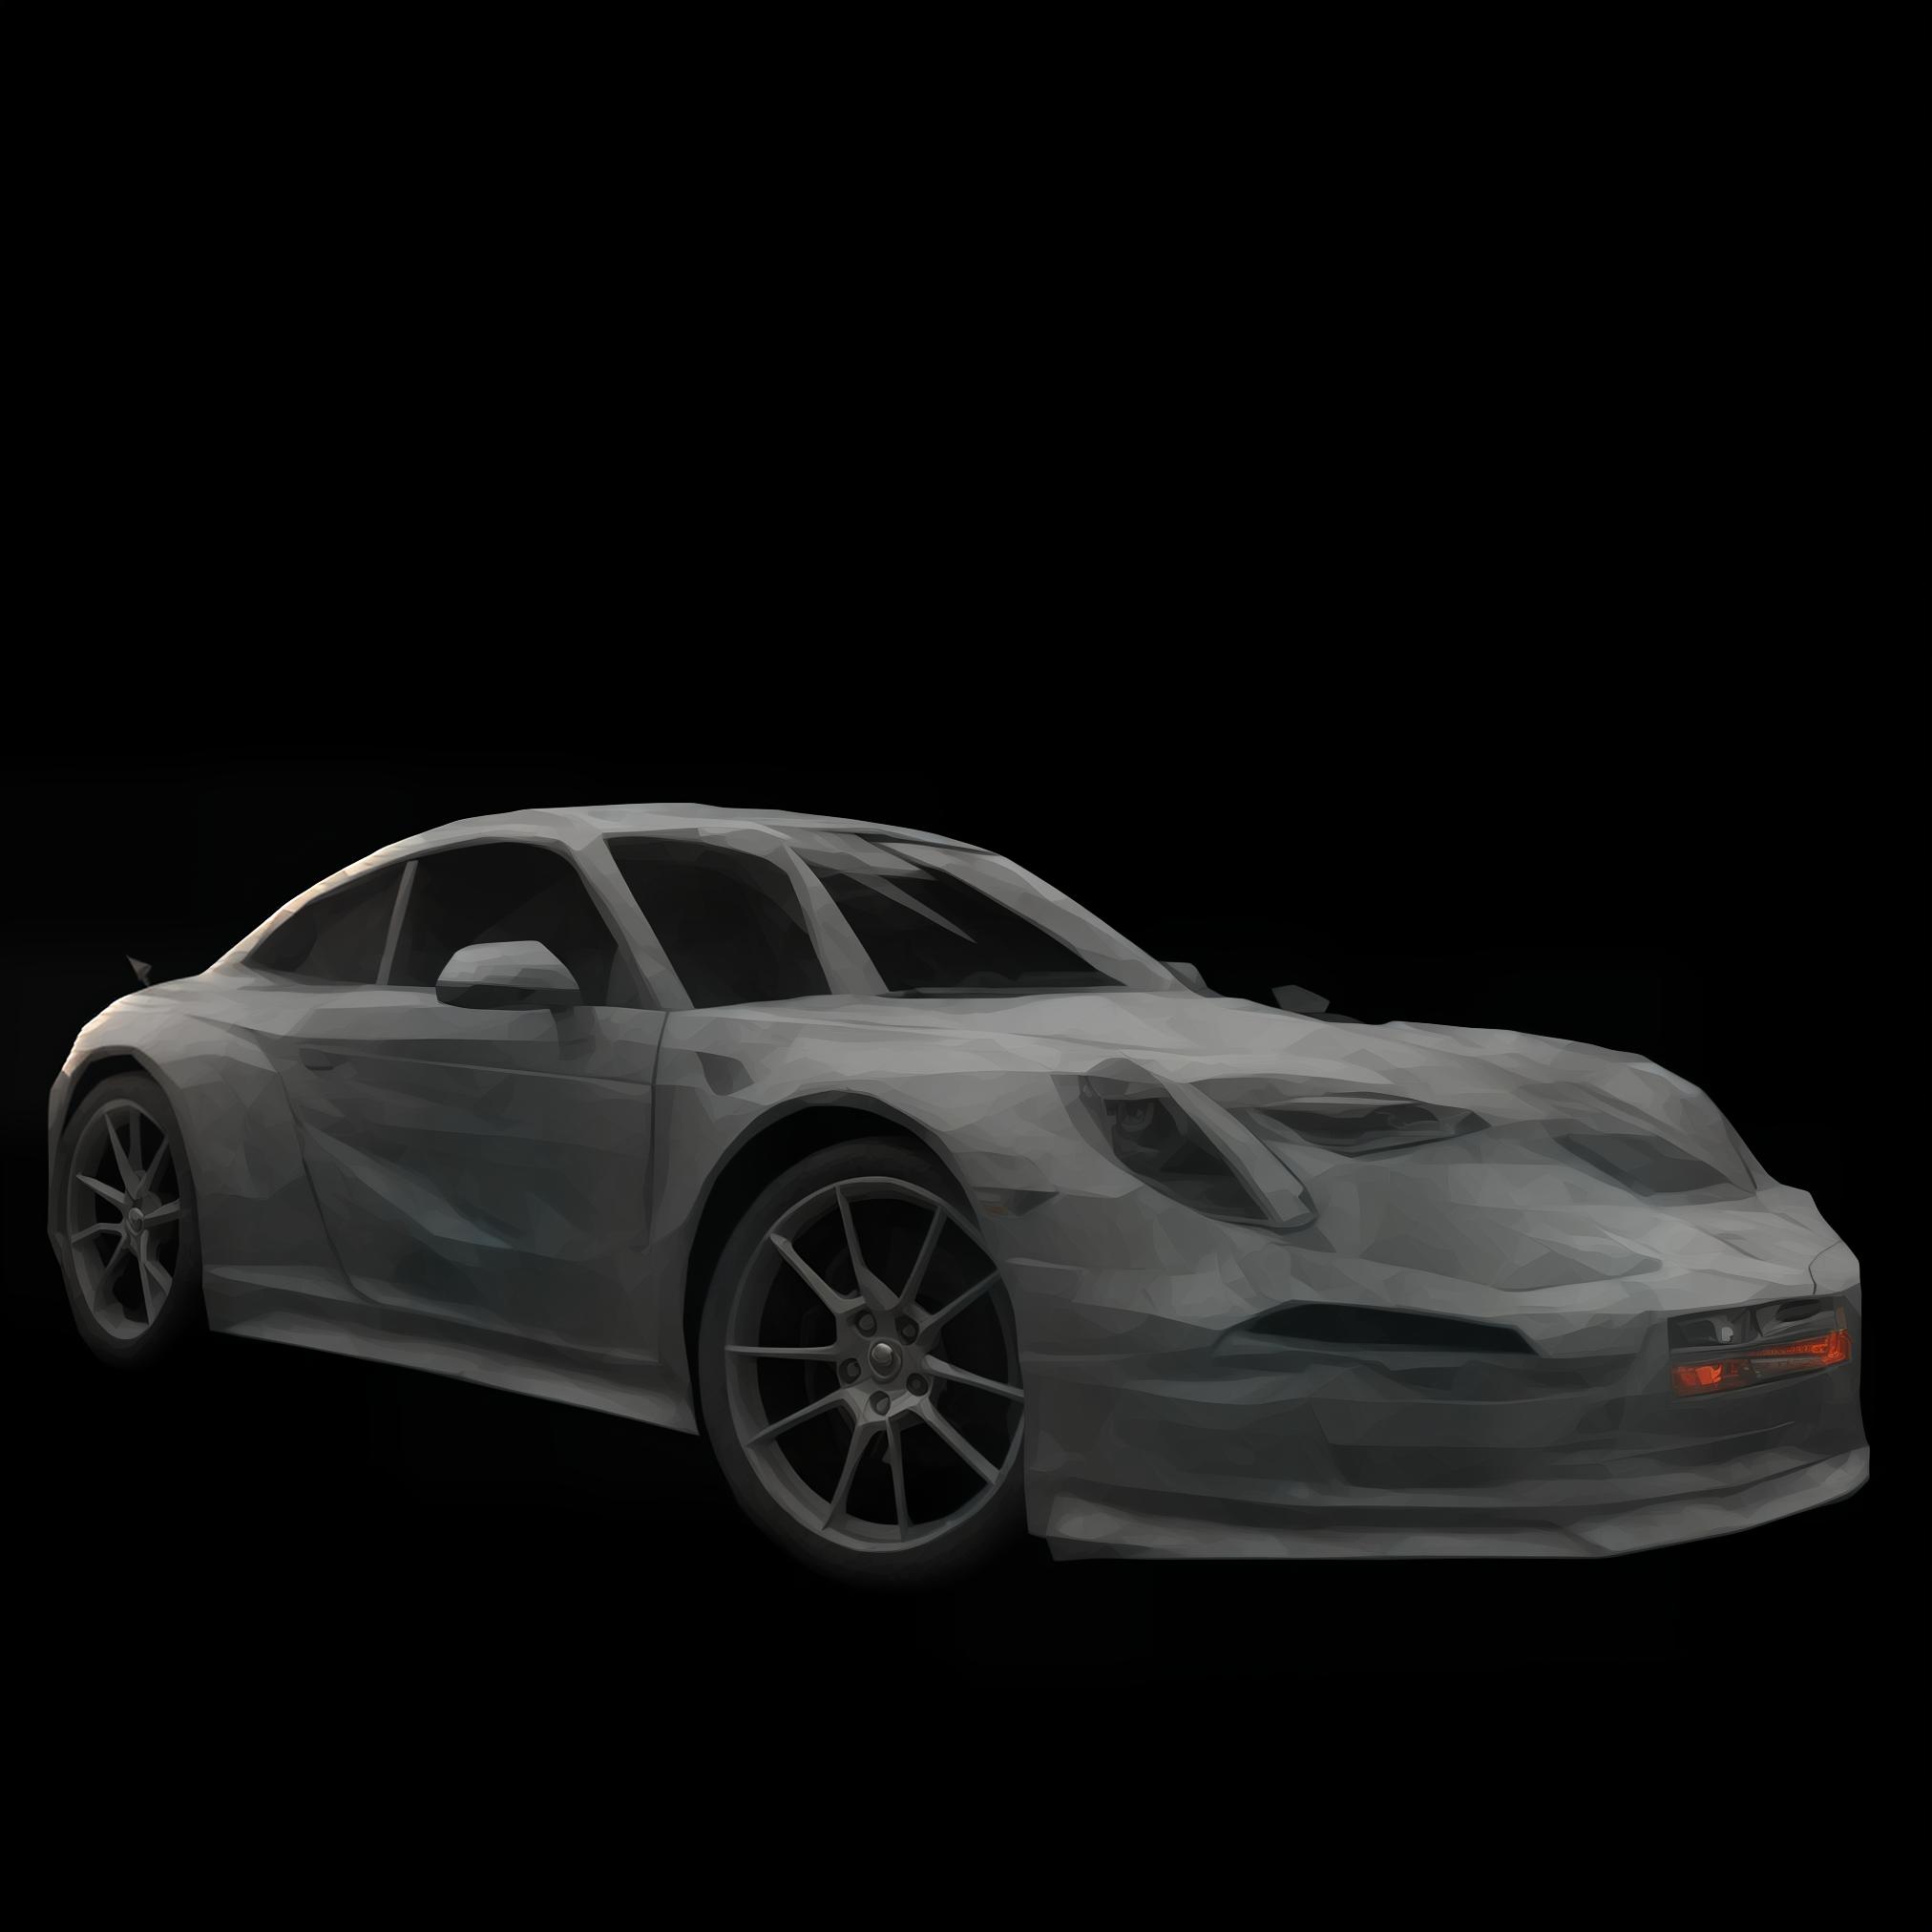 mdjrny-v4 style Generate shadow of the car